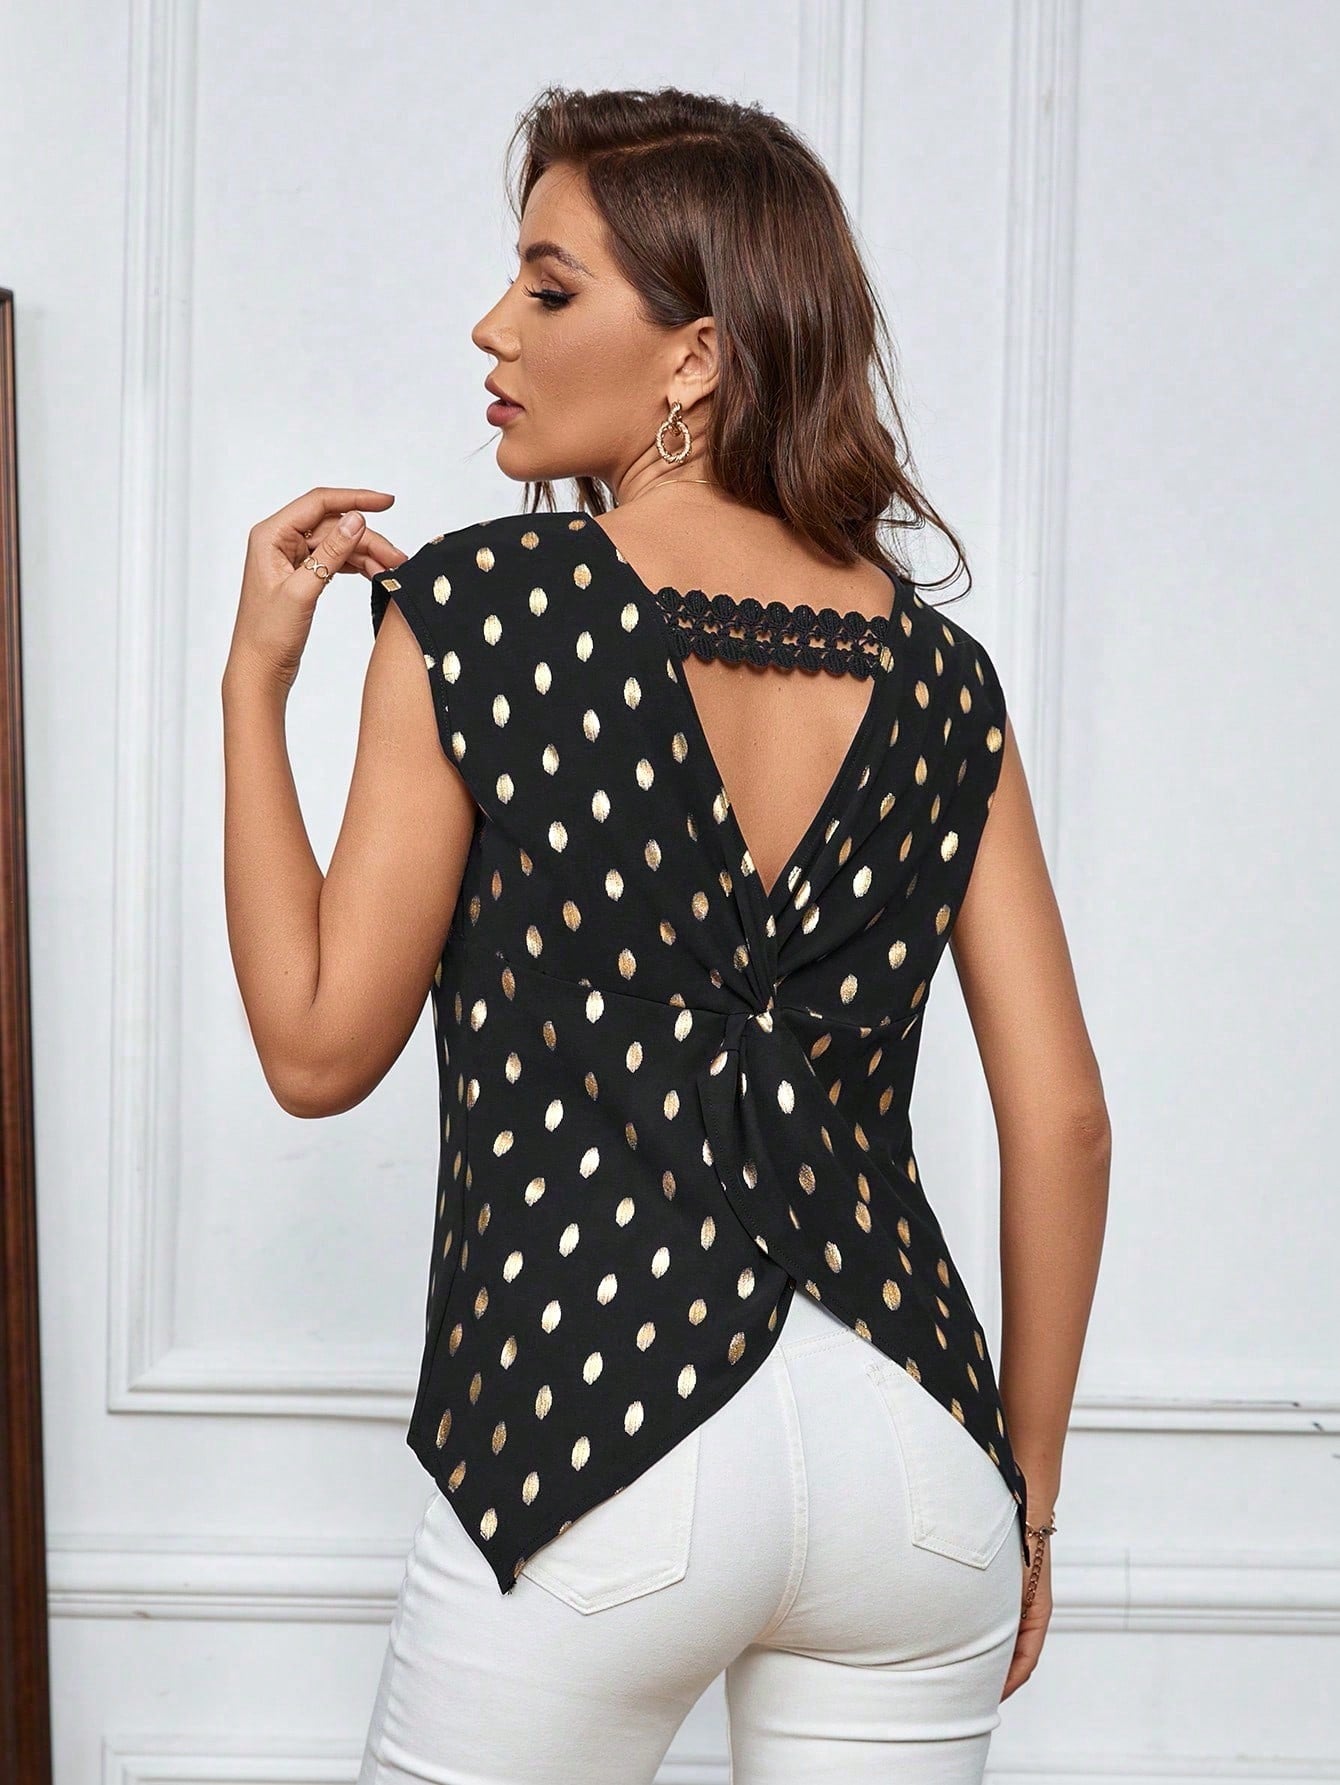 Polka Dot Print Hollow Out Shirt With Twist Detailing On Back, Perfect For Summer